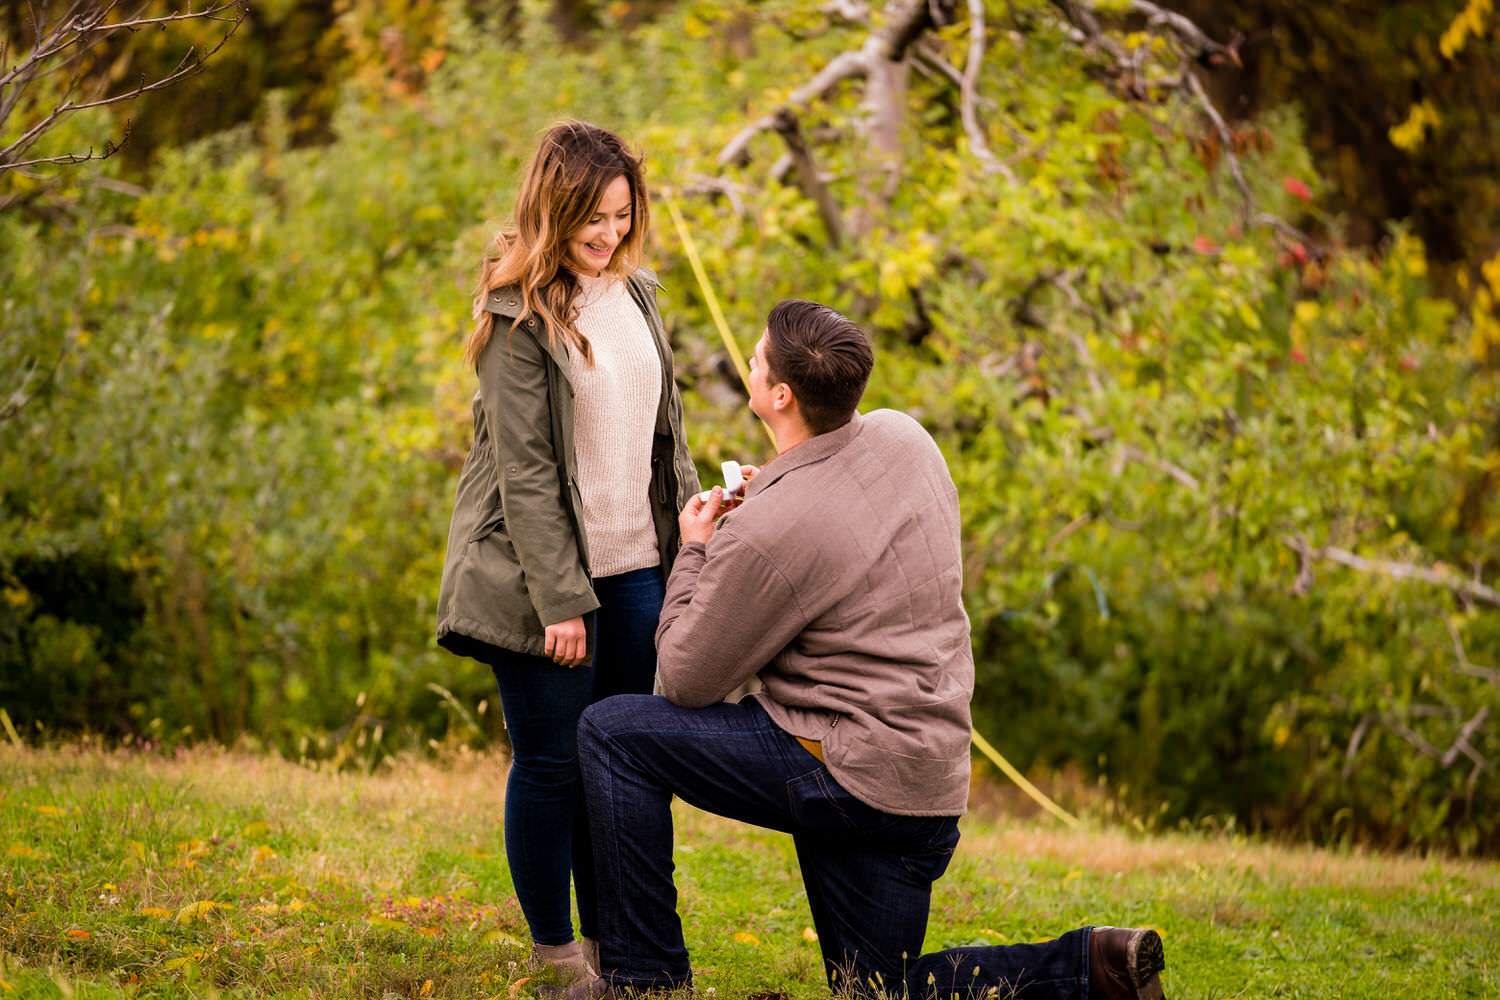 pittsburgh engagement proposal photographer • Pittsburgh Surprise Proposal Photography | Engagement